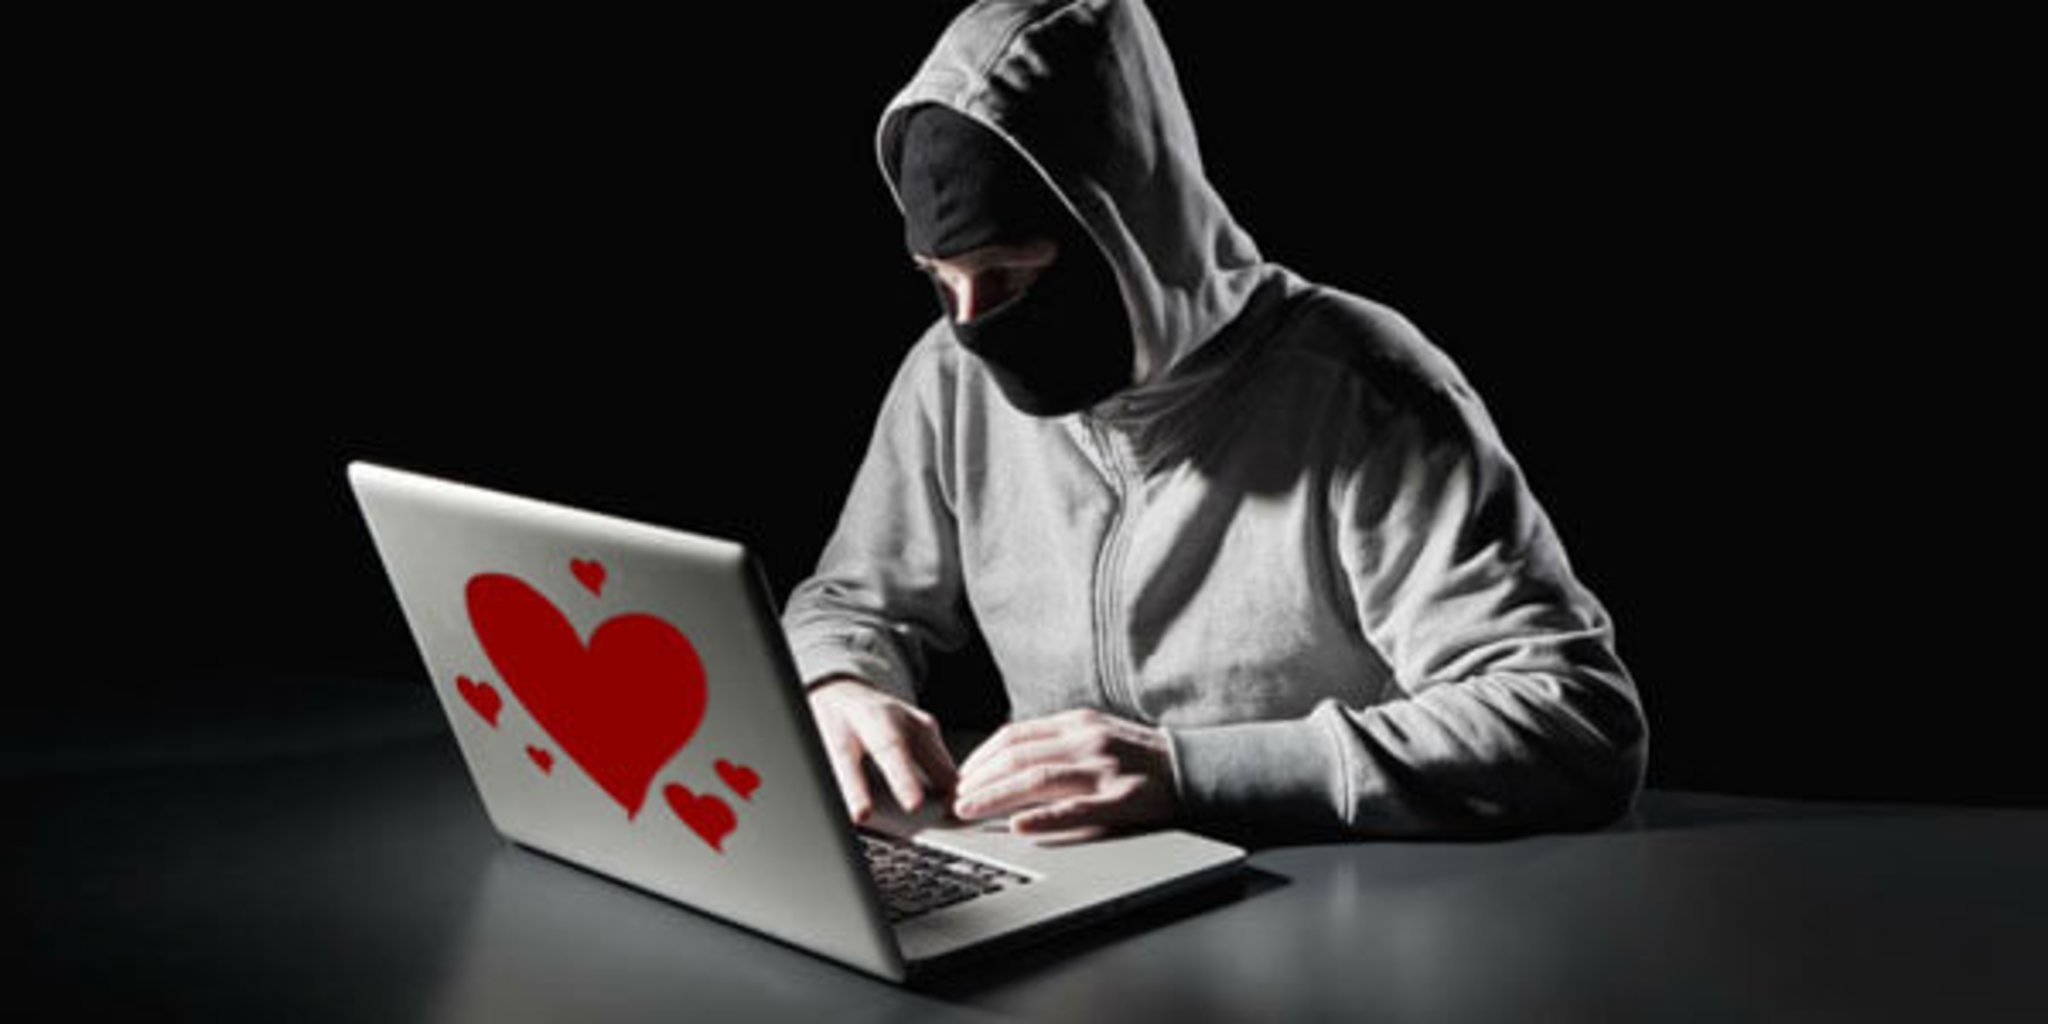 LOVE HURTS – PROTECT YOURSELF FROM A ROMANCE SCAM